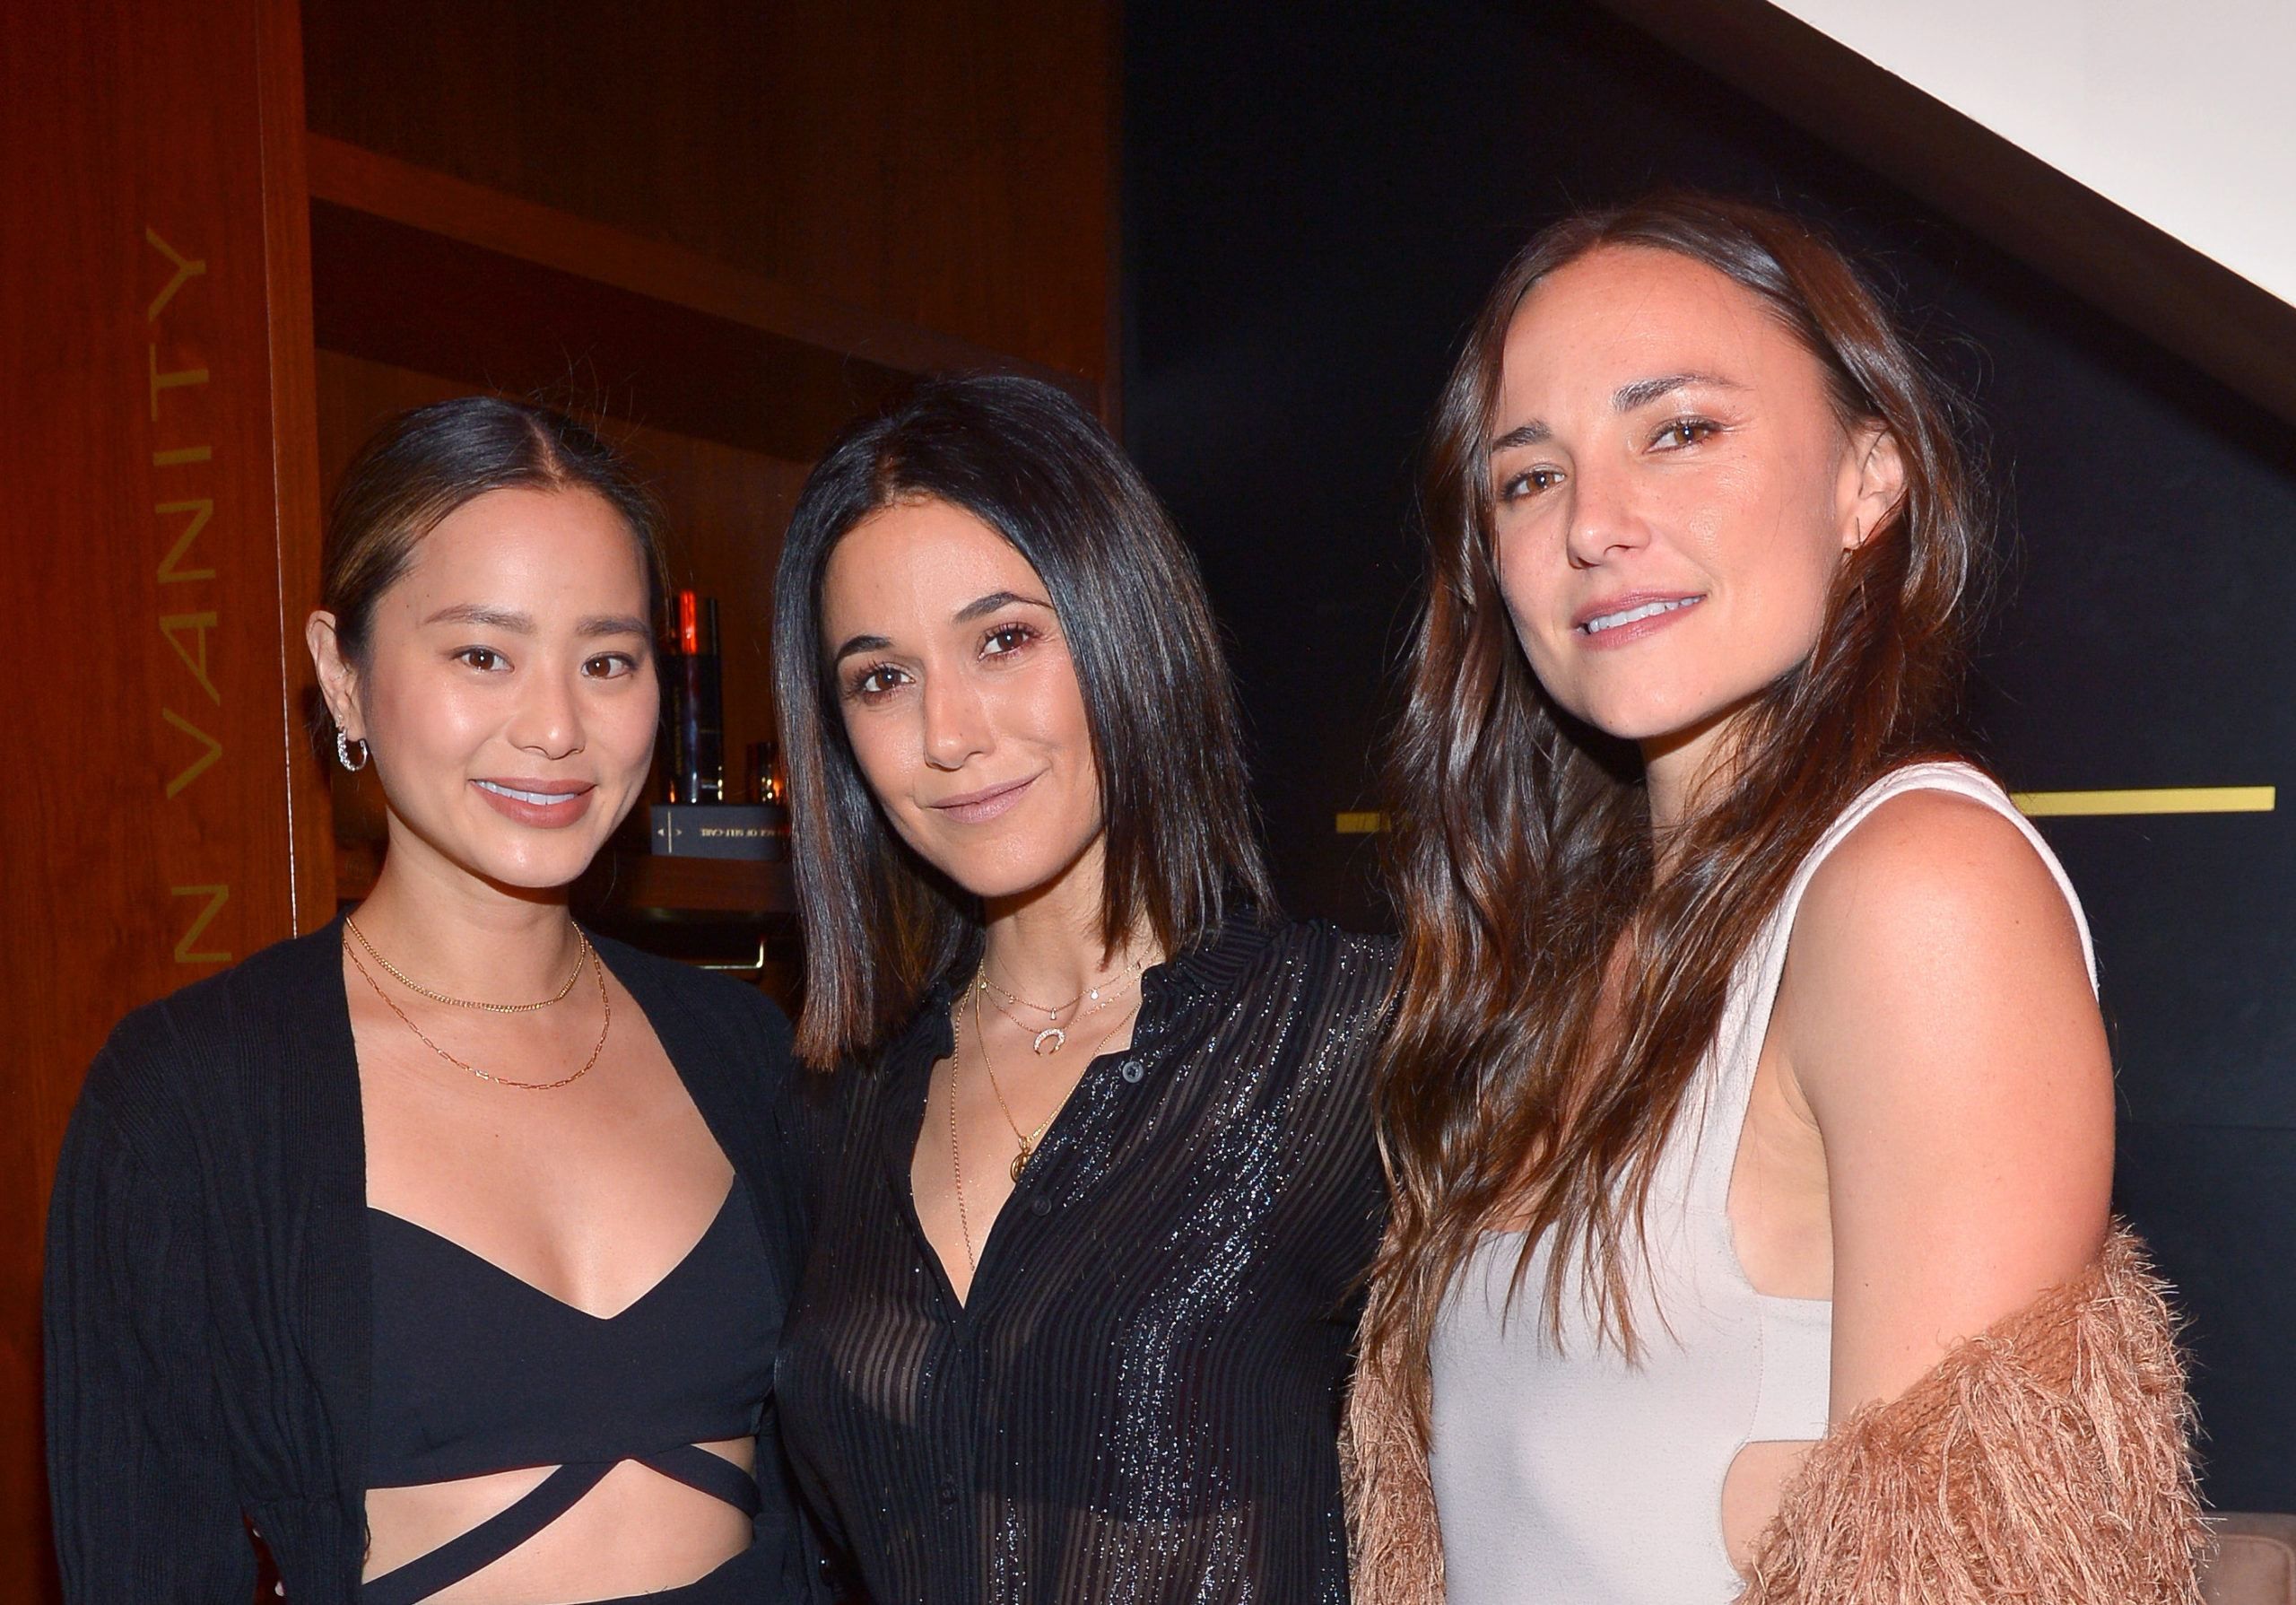 Jamie Chung, Emmanuelle Chriqui and Briana Evigan attend the launch party for American Vanity skincare line in West Hollywood.